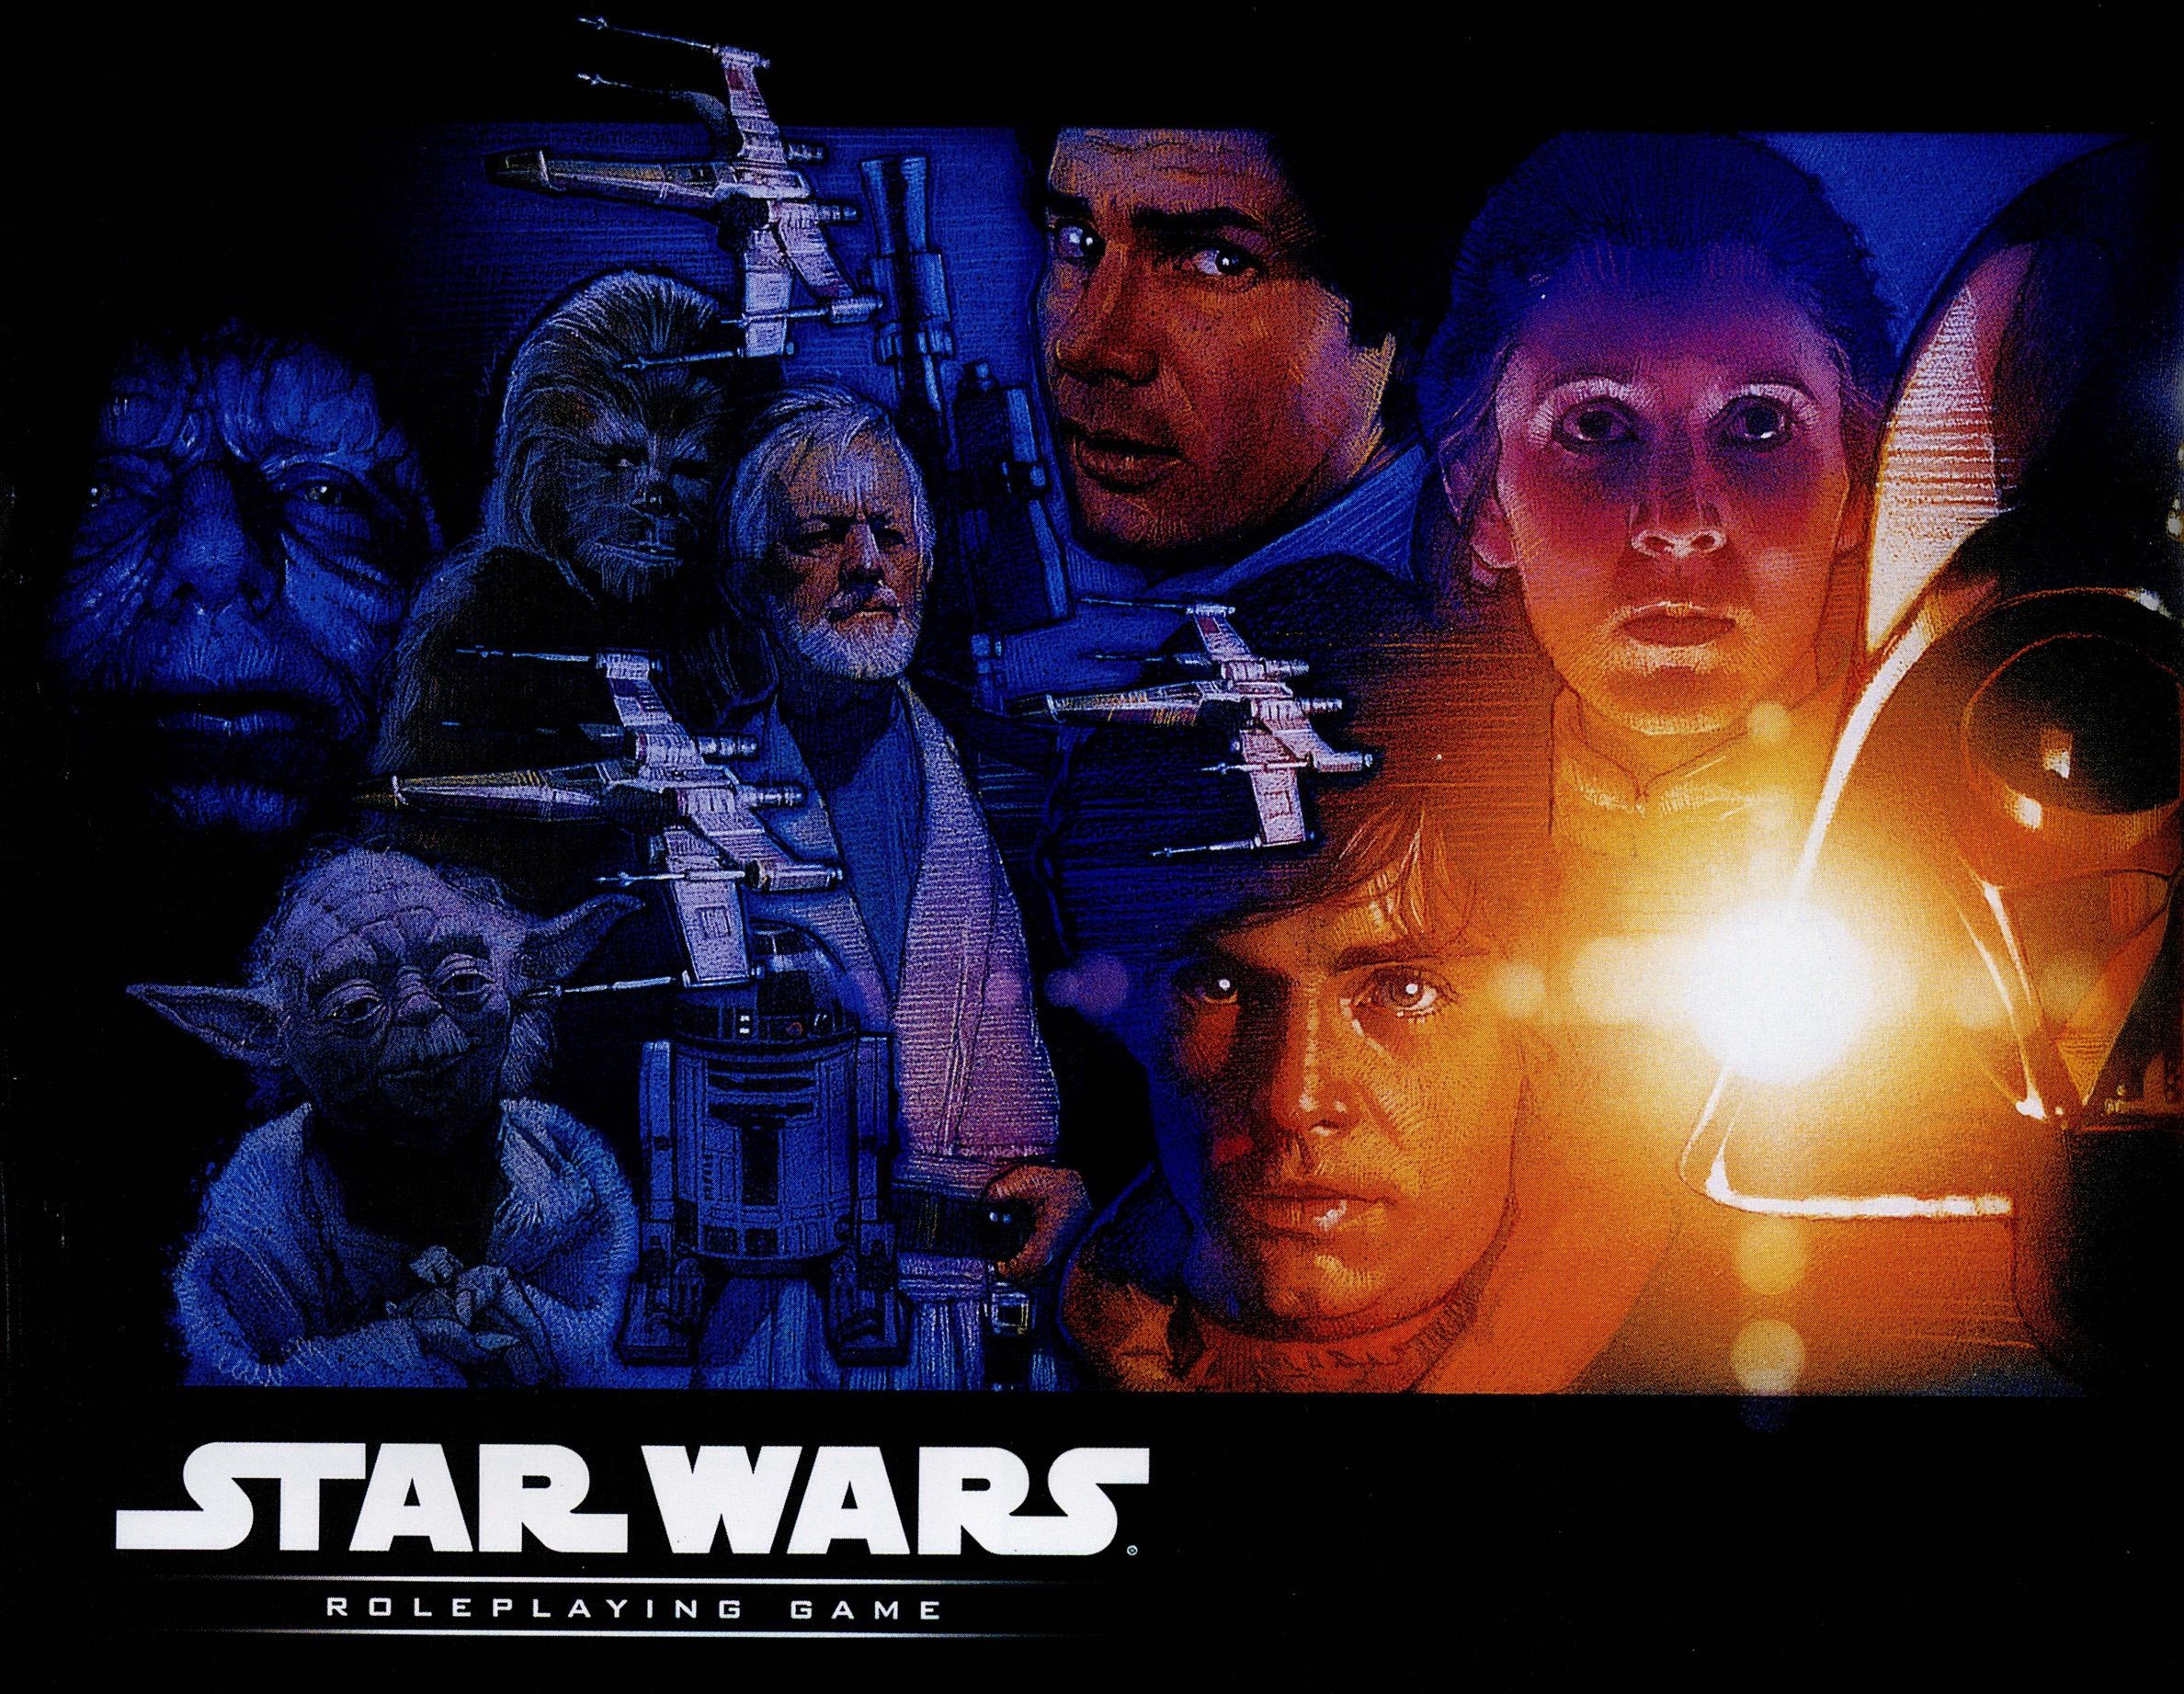 Star Wars Episode IV new Hope wallpapers and images   wallpapers